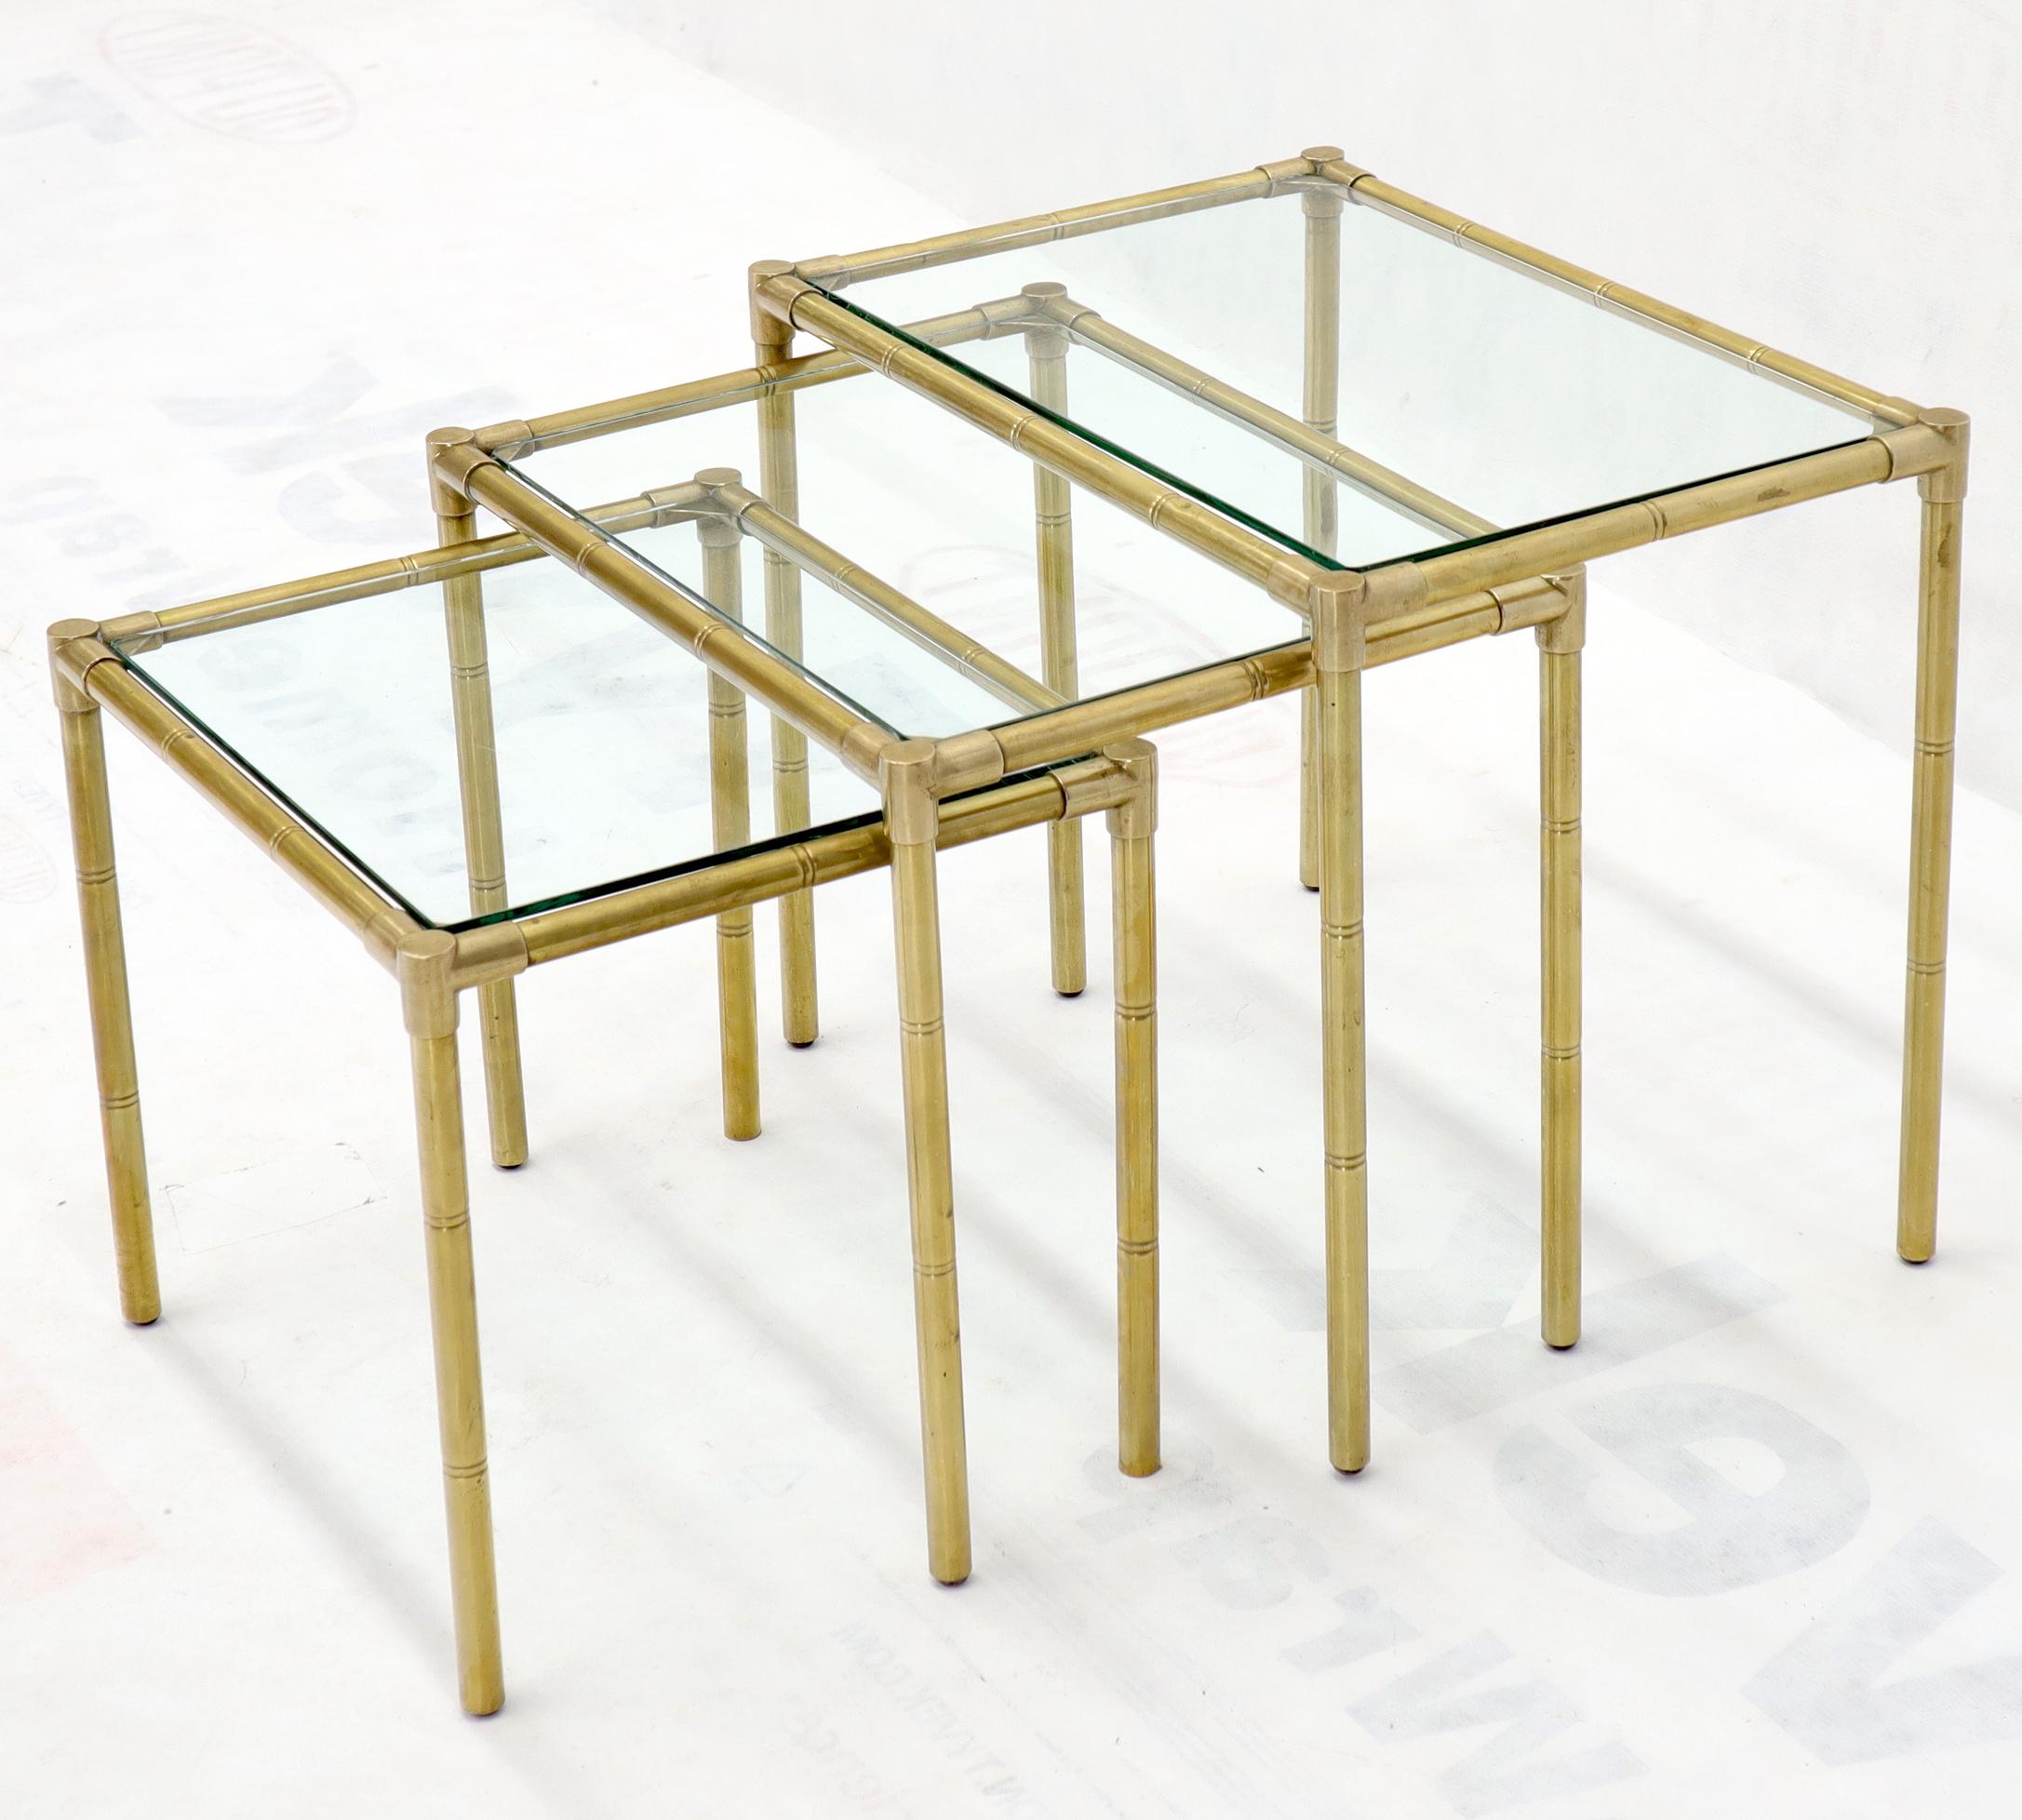 Quality Solid Brass Faux Bamboo Italian Mid Modern Nesting Tables In Excellent Condition For Sale In Rockaway, NJ